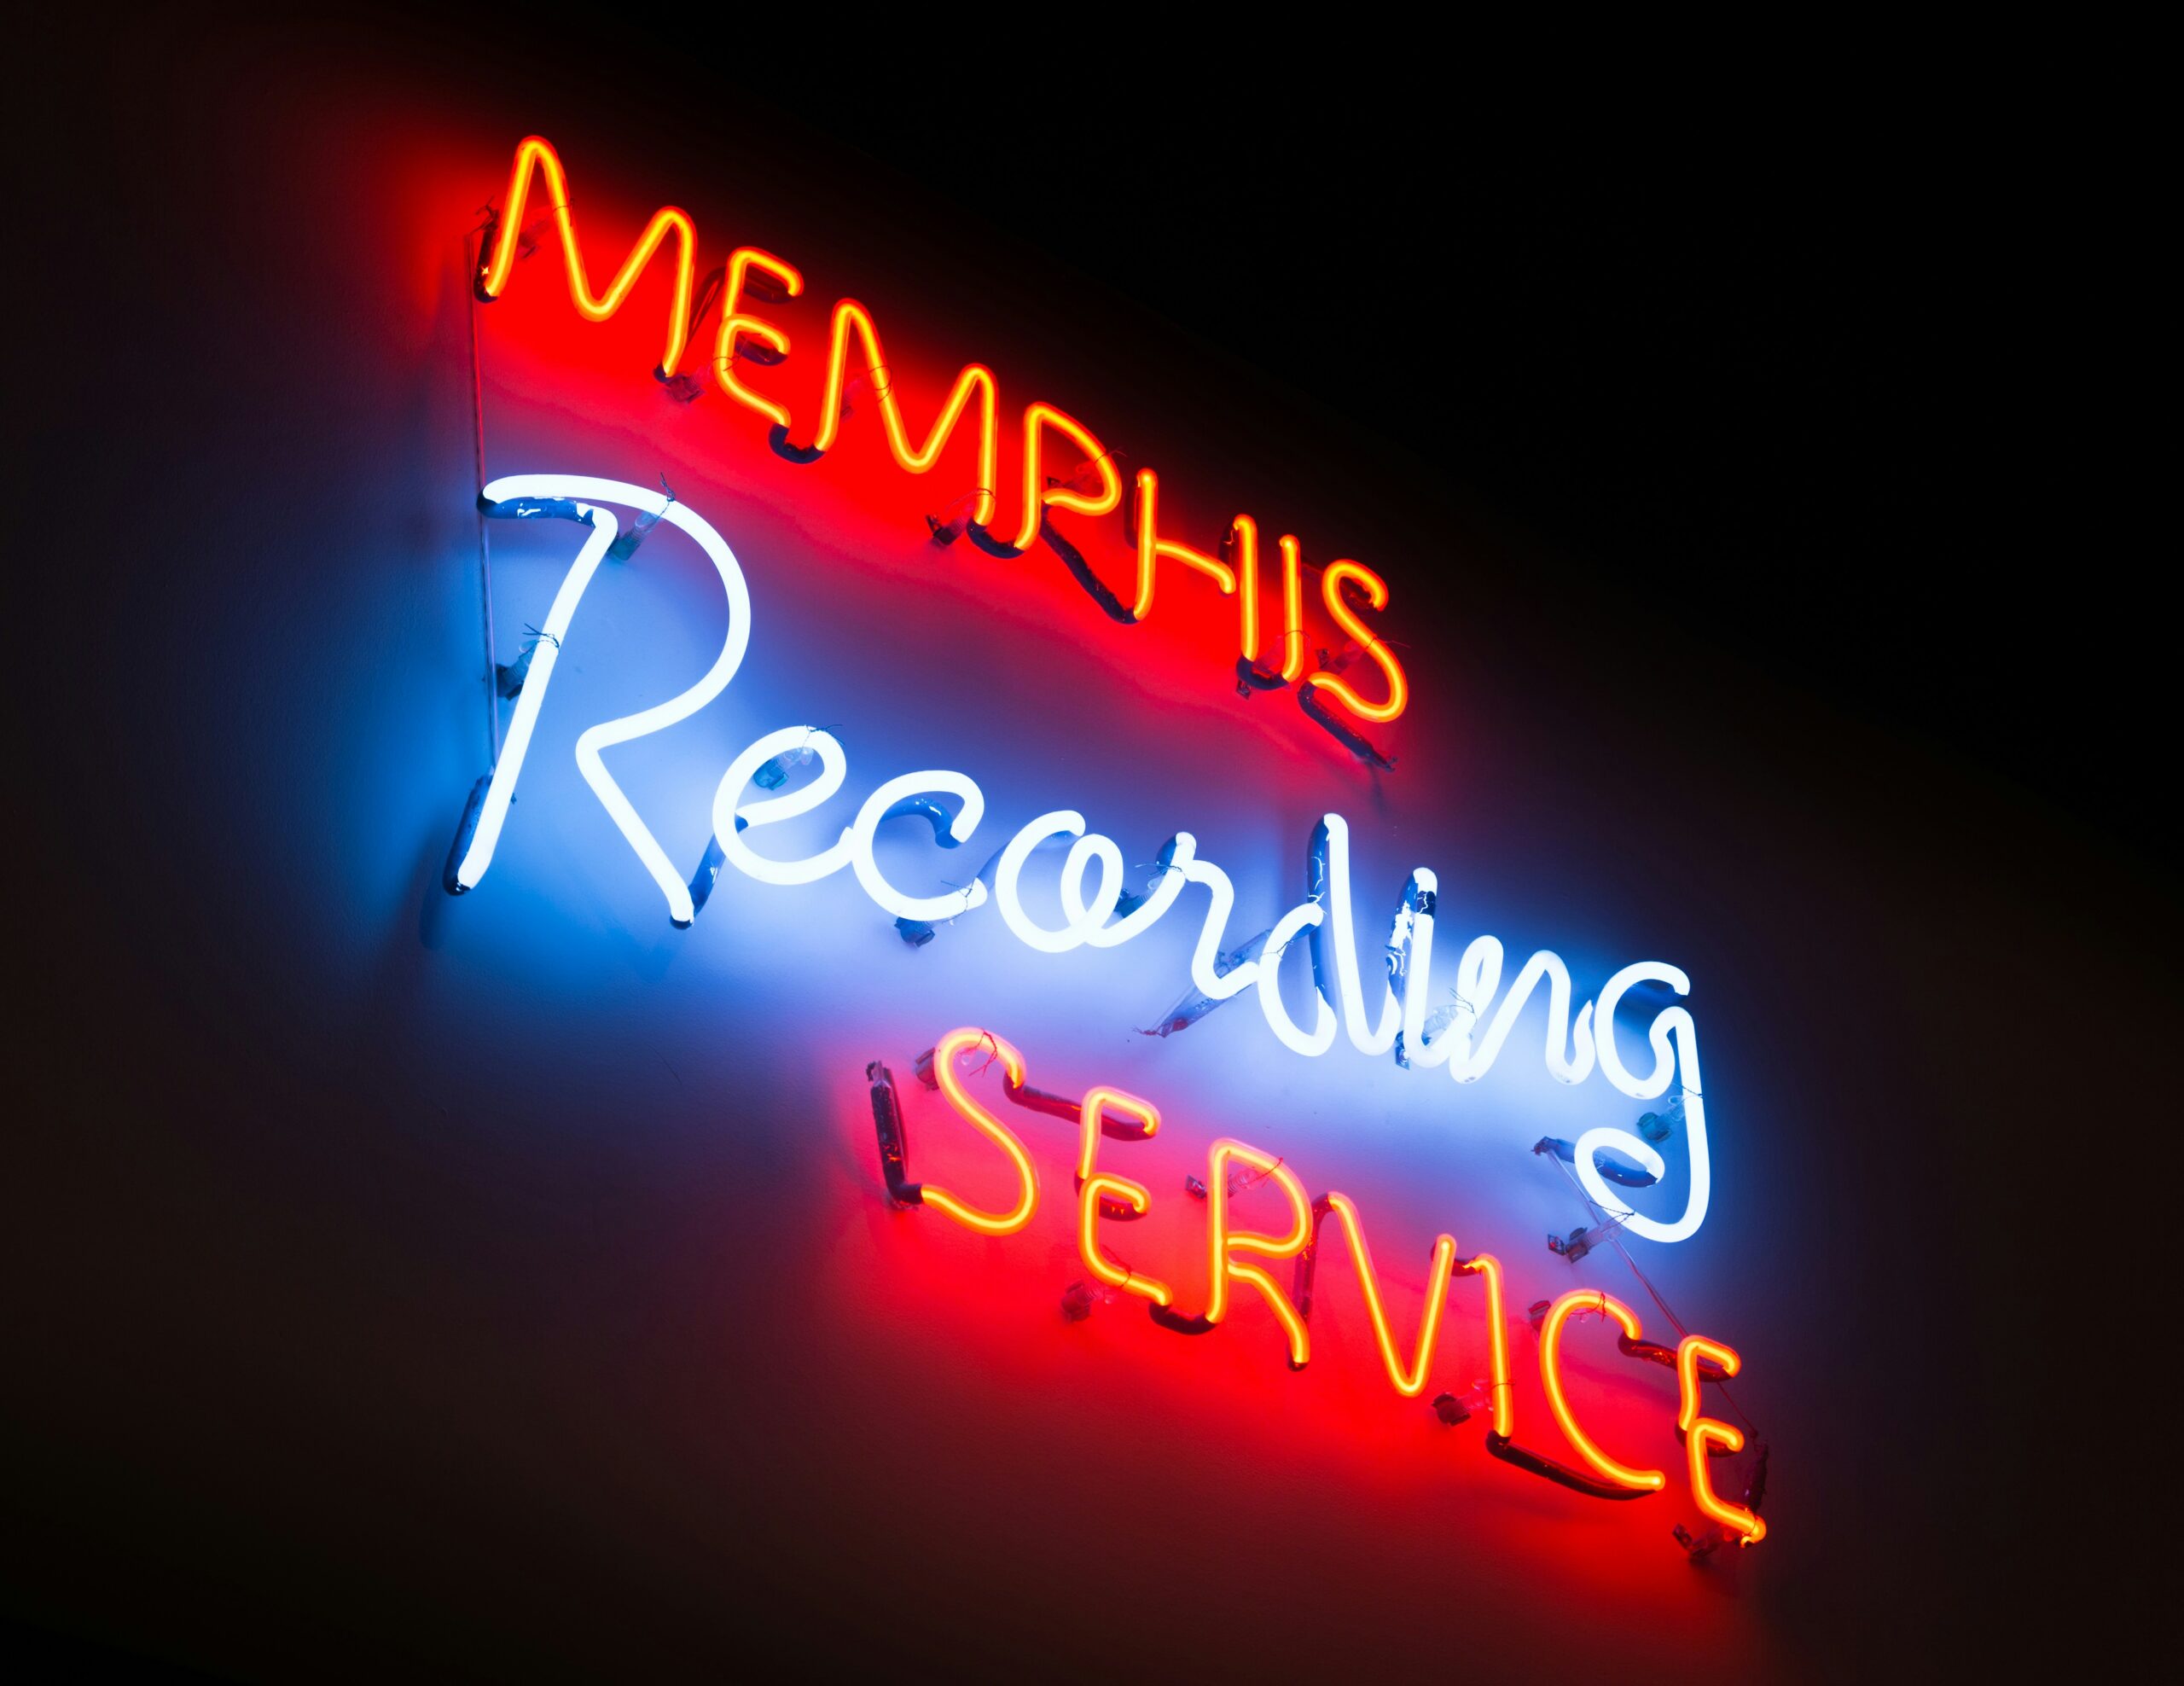 A neon sign that reads: "Memphis Recording Service"